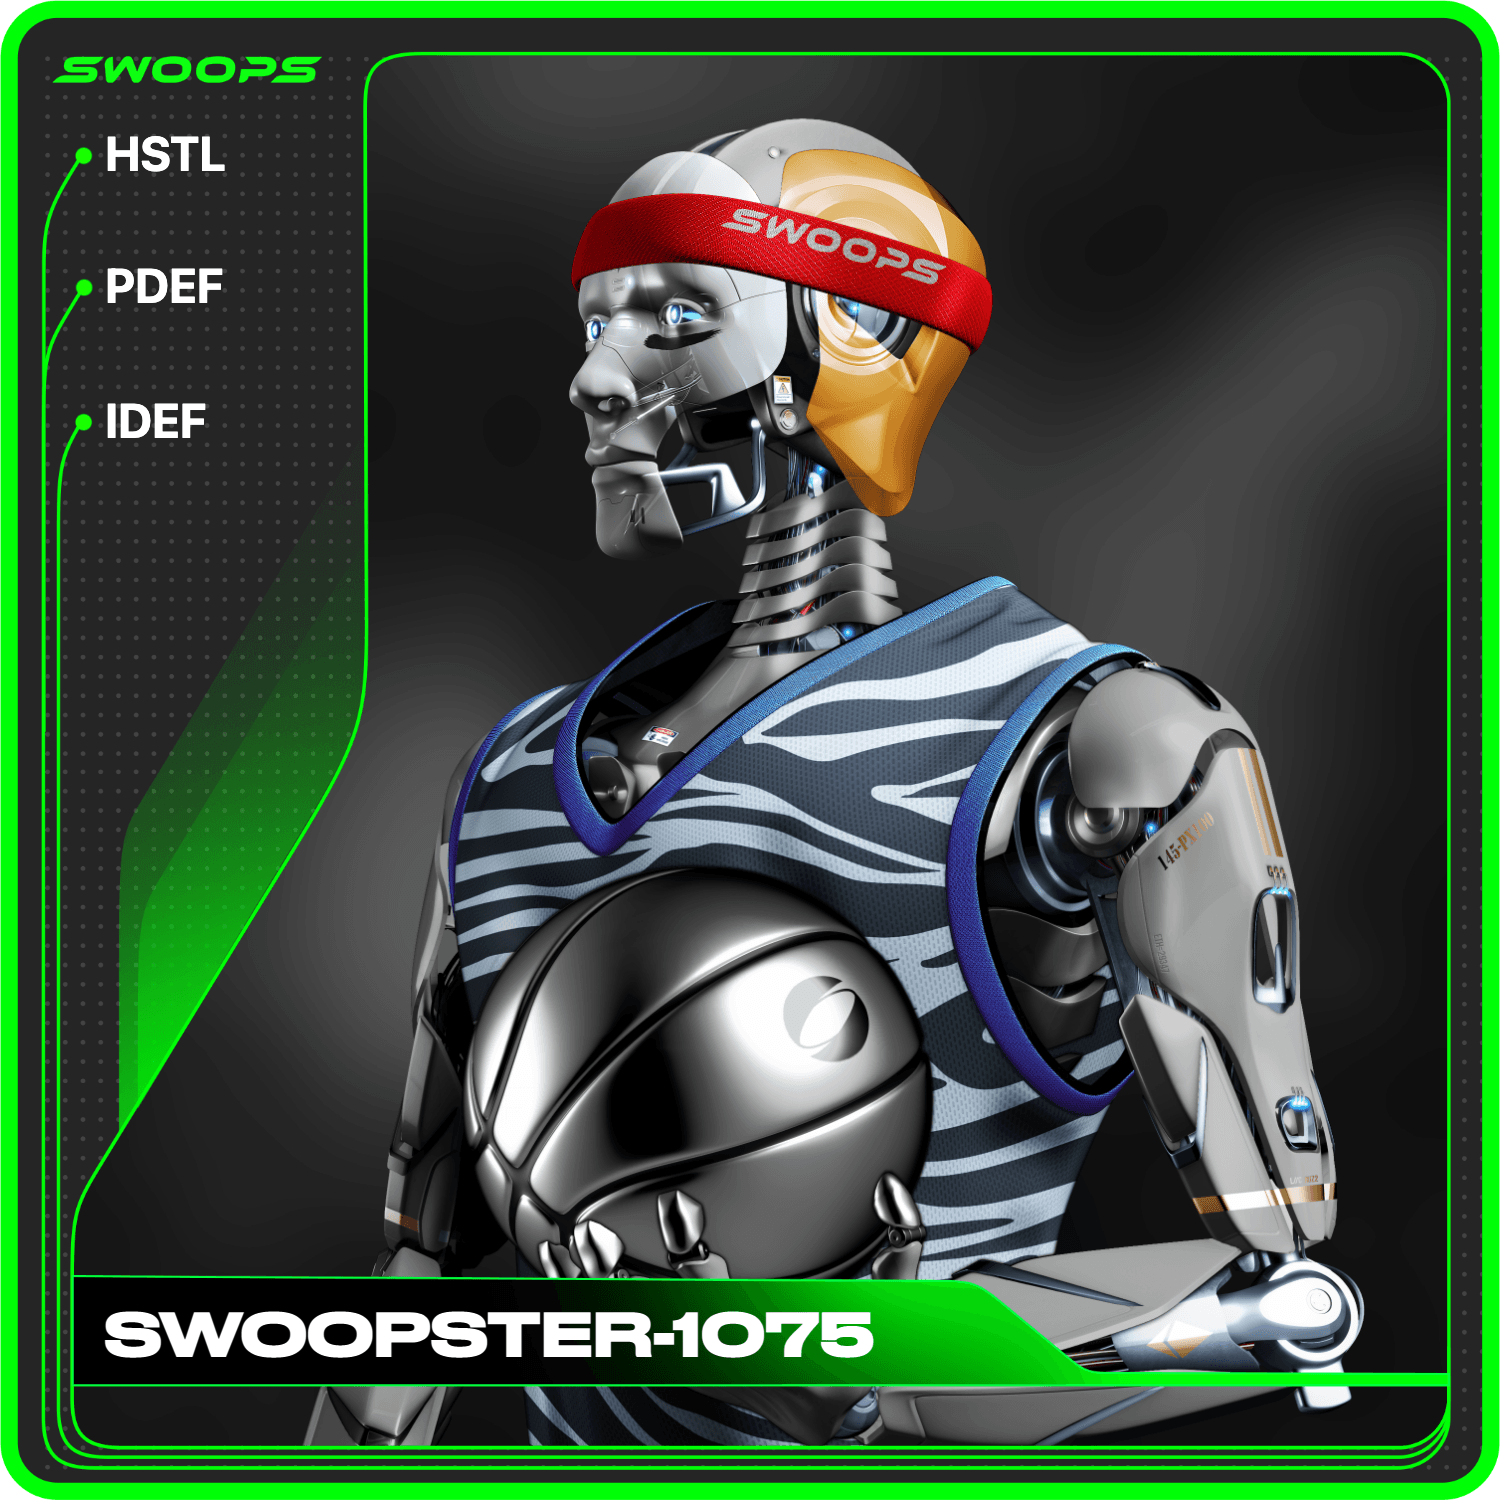 SWOOPSTER-1075